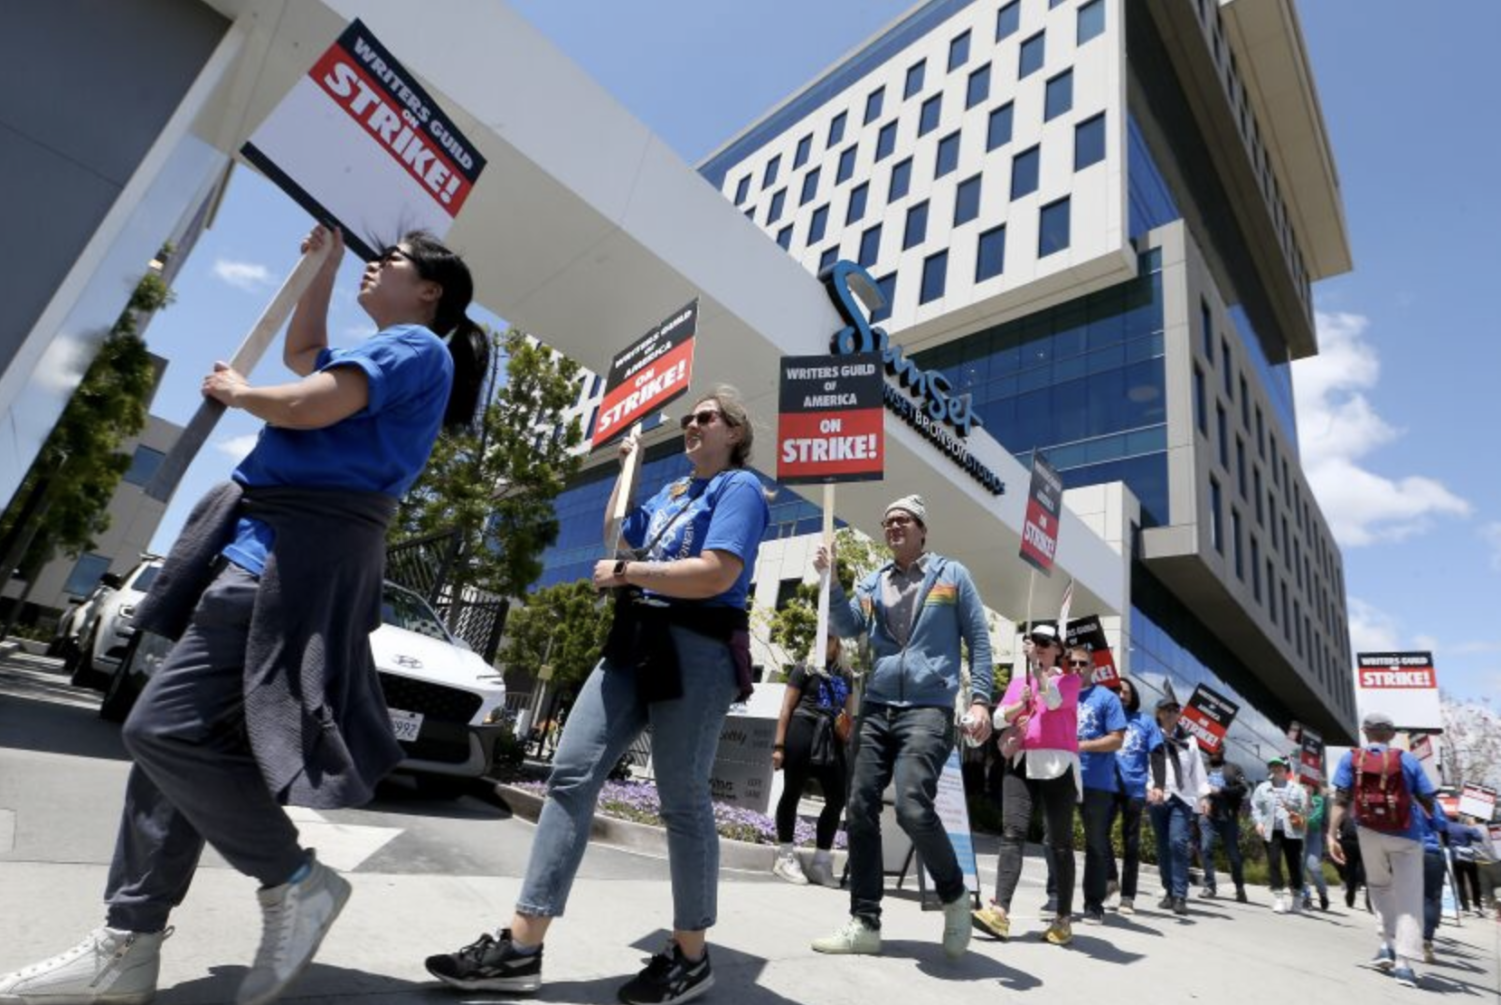 For the first time in 15 years, the Writers Guild of America goes on strike